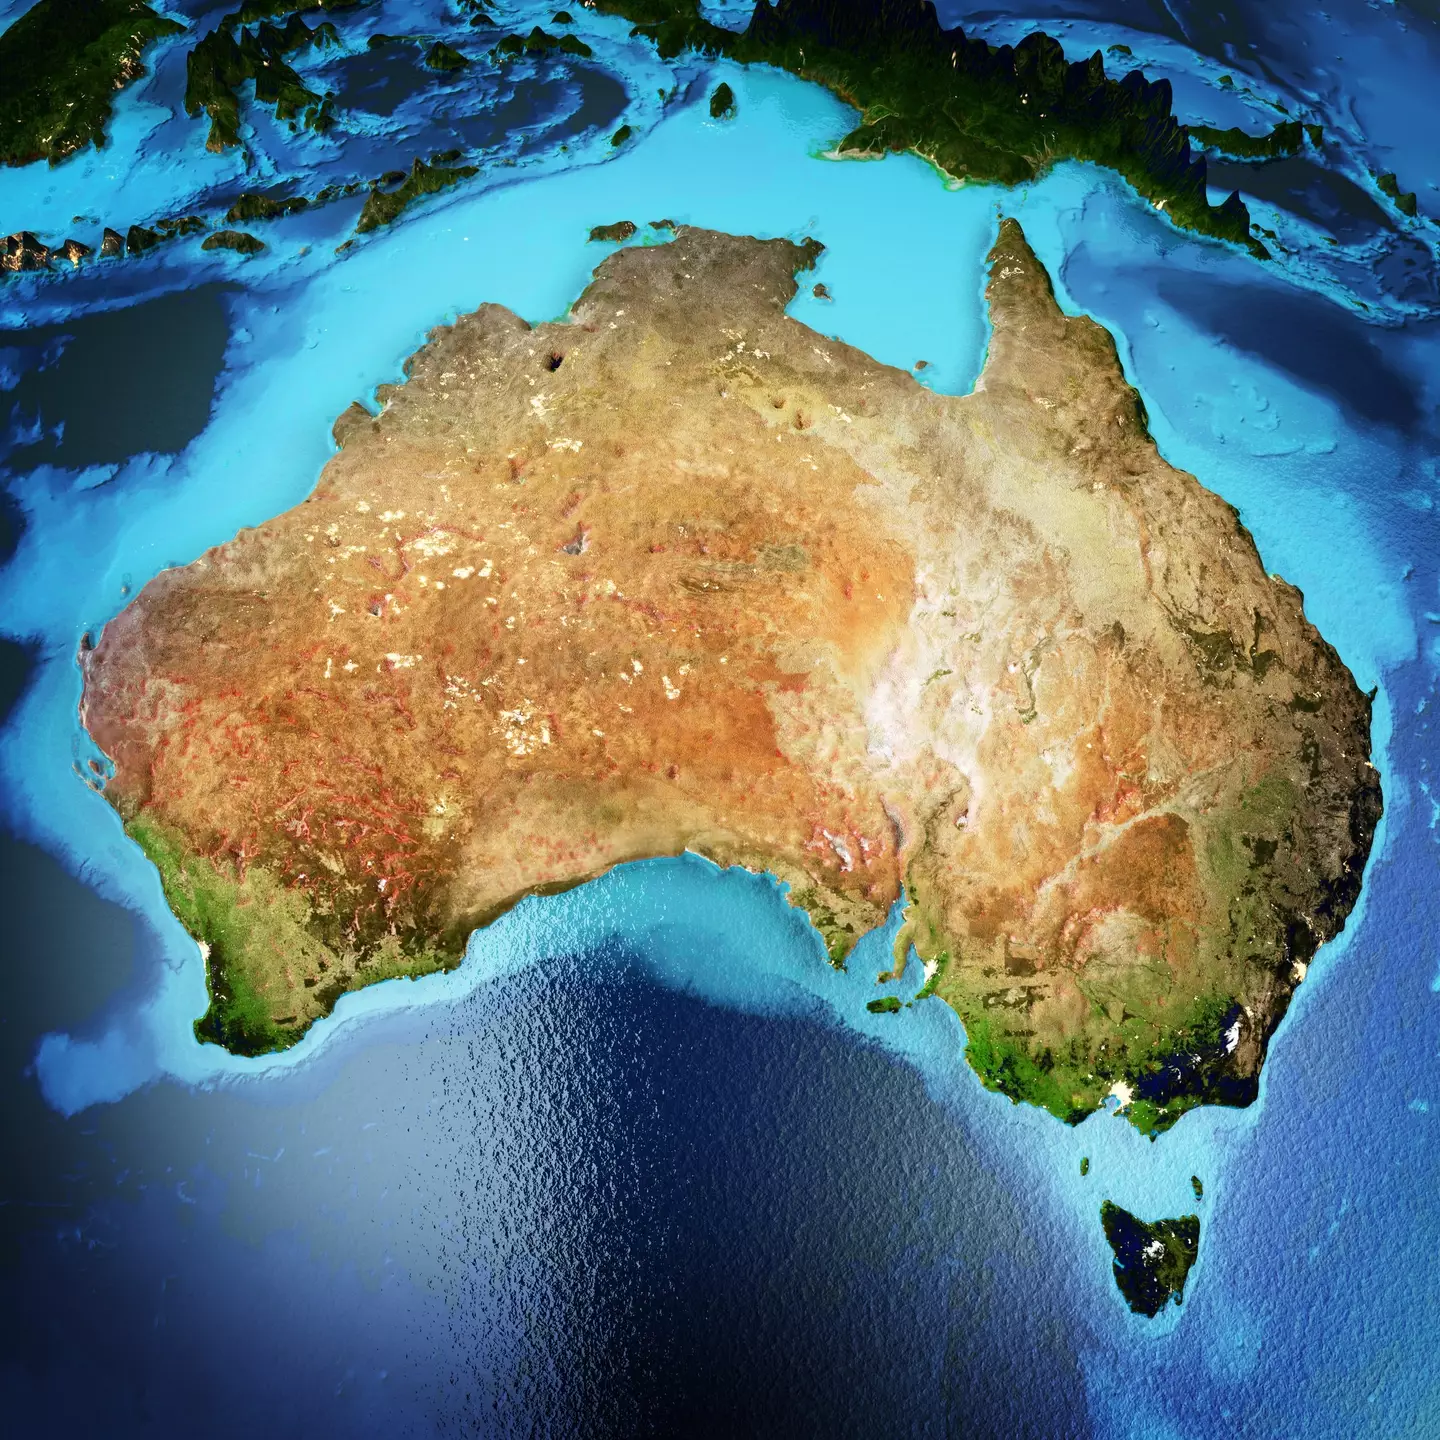 As it turns out, Australia is really rather large.